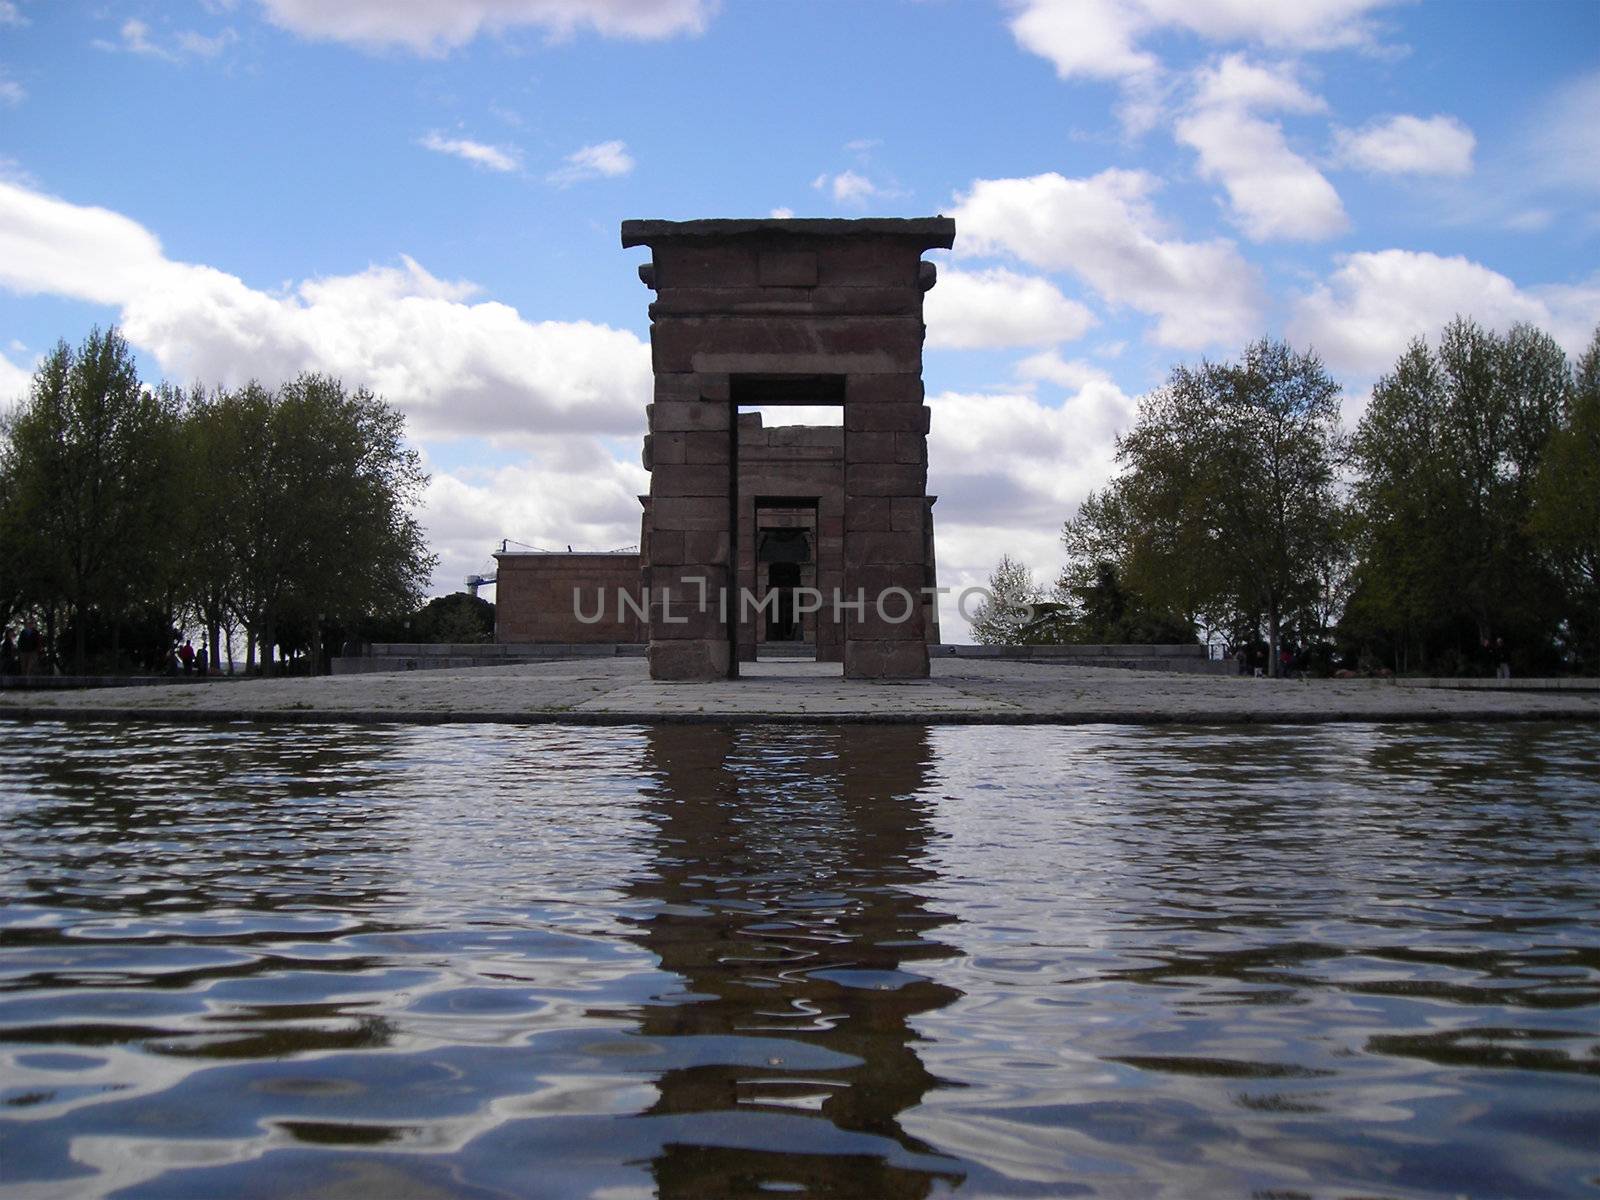 View of the Debod Temple in Madrid surrounded by a pond and trees, a gift from egiptian king to Juan Carlos I, King of Spain.